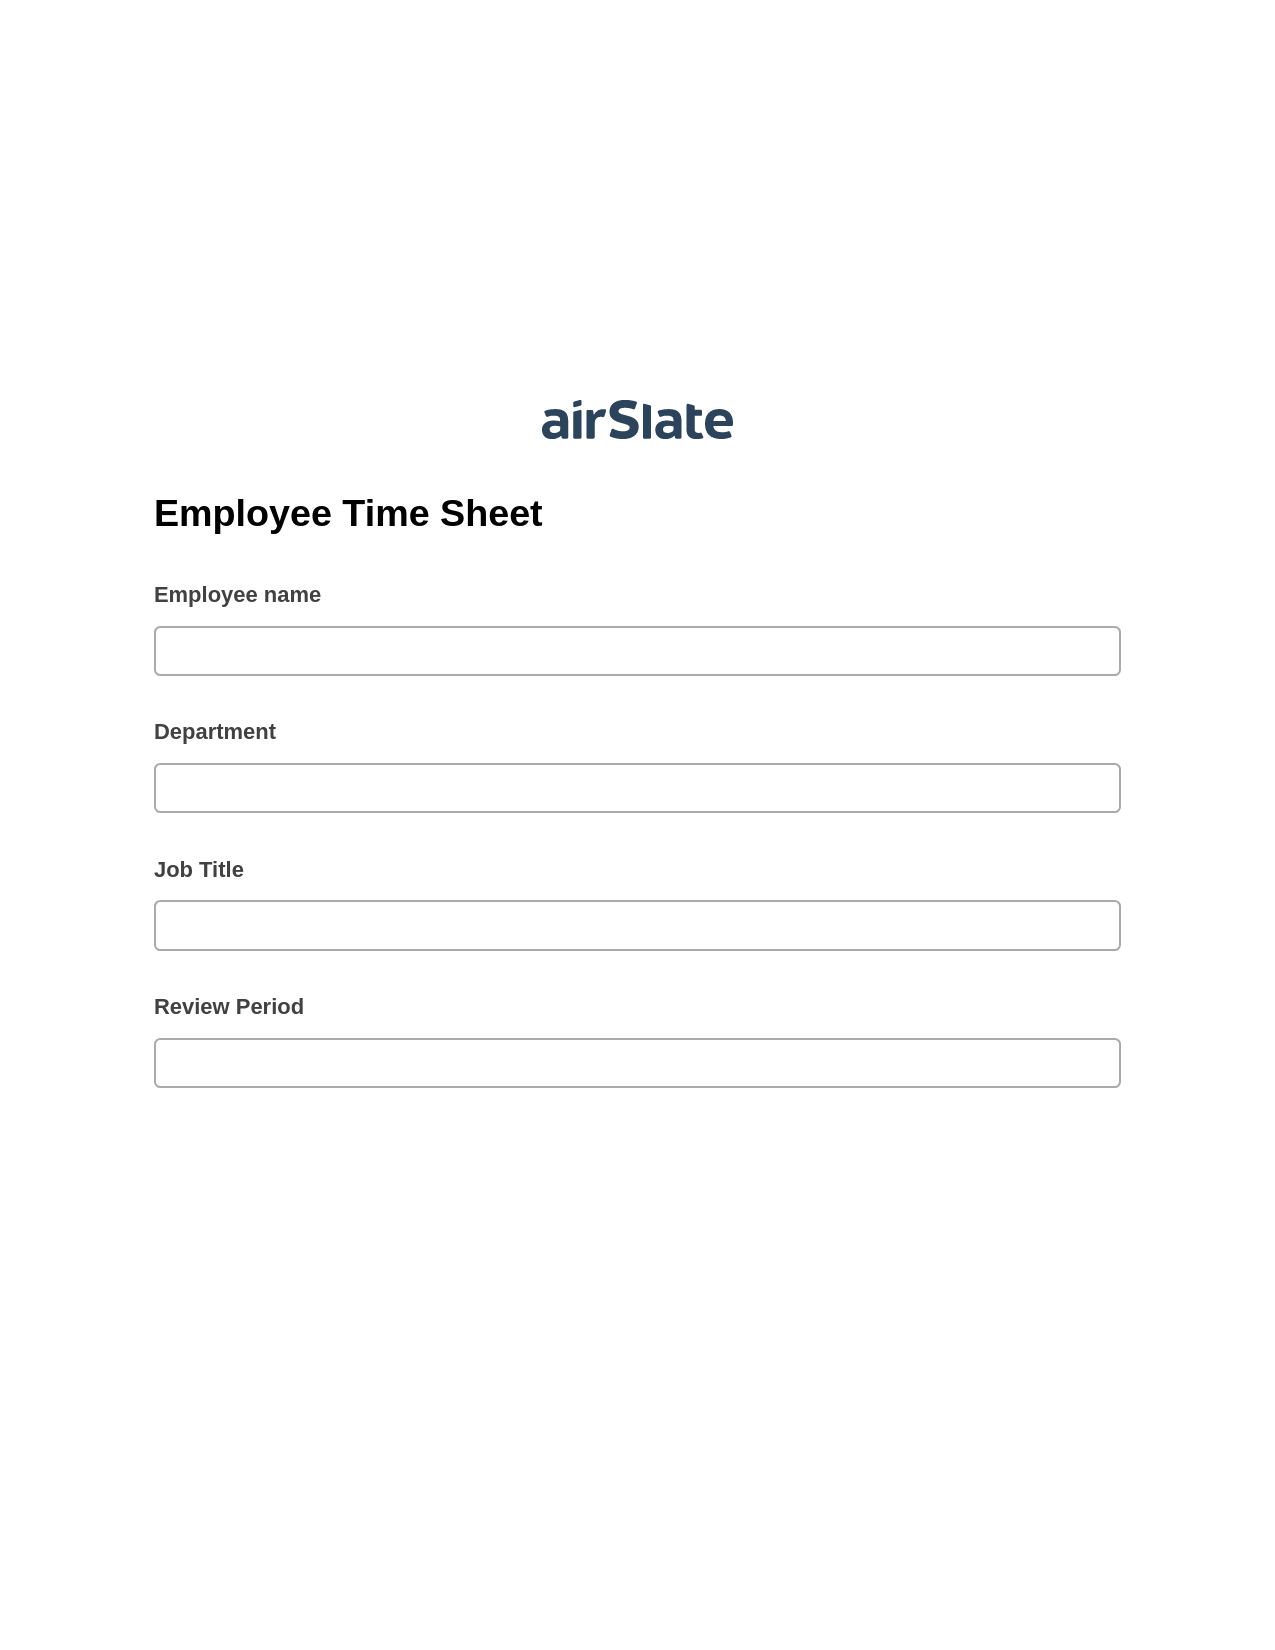 Multirole Employee Time Sheet Pre-fill Dropdowns from Excel Bot, Revoke Access Bot, Archive to Google Drive Bot